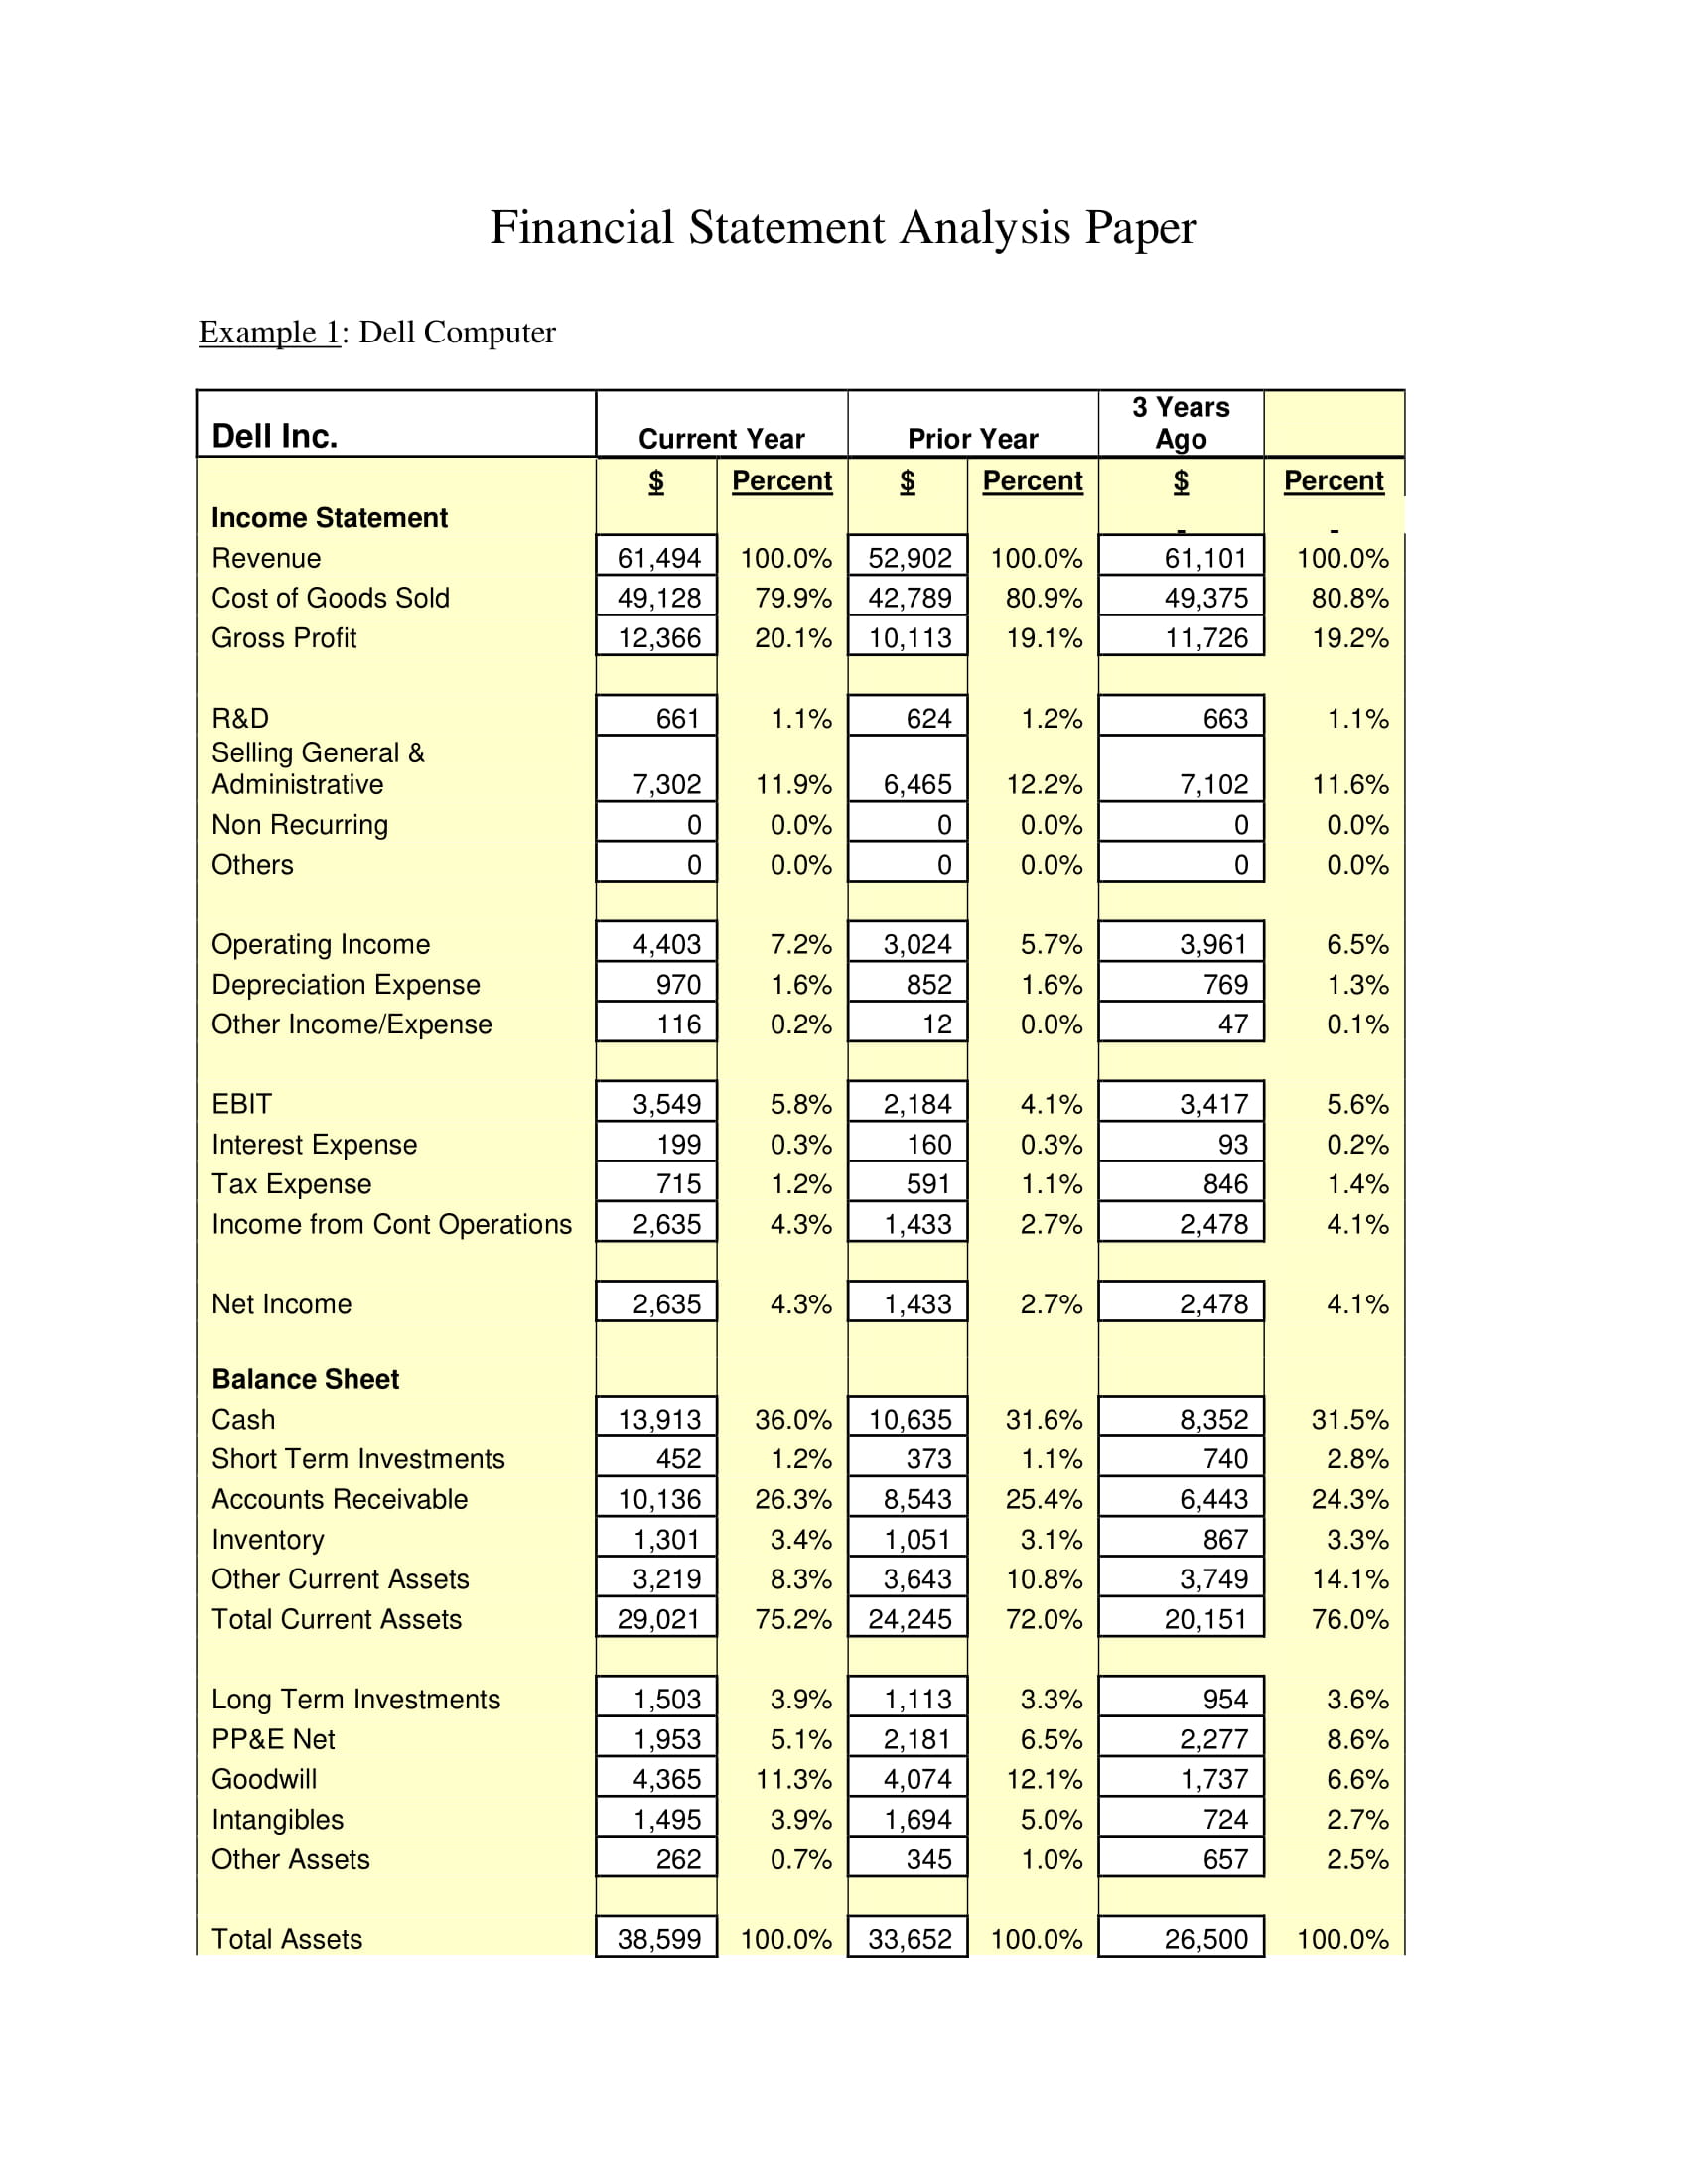 financial statement analysis paper example 1